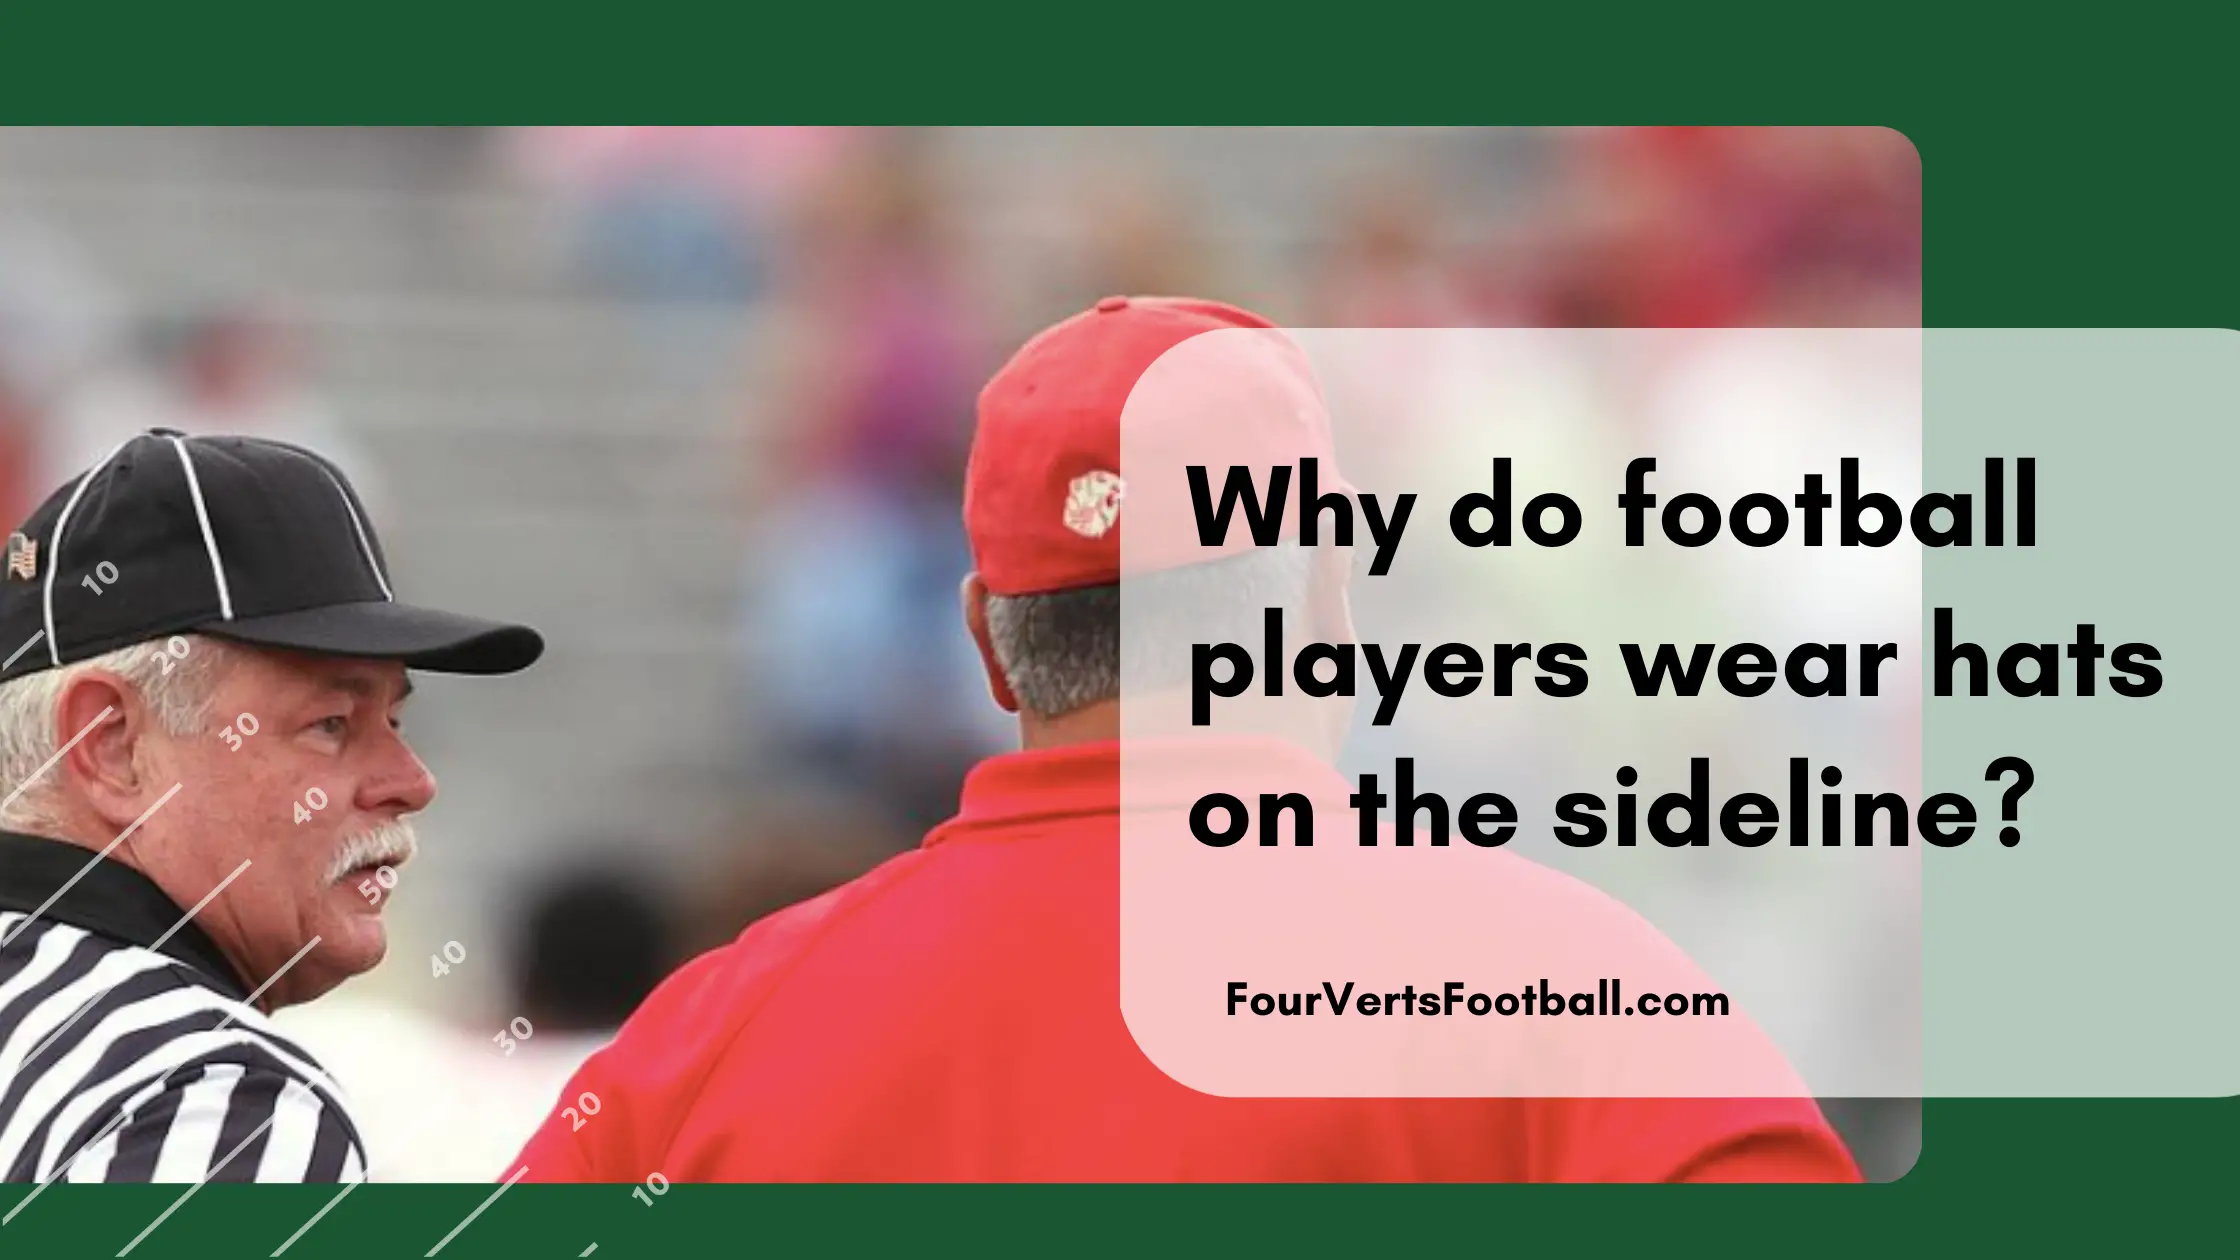 Why do football players wear hats on the sideline?